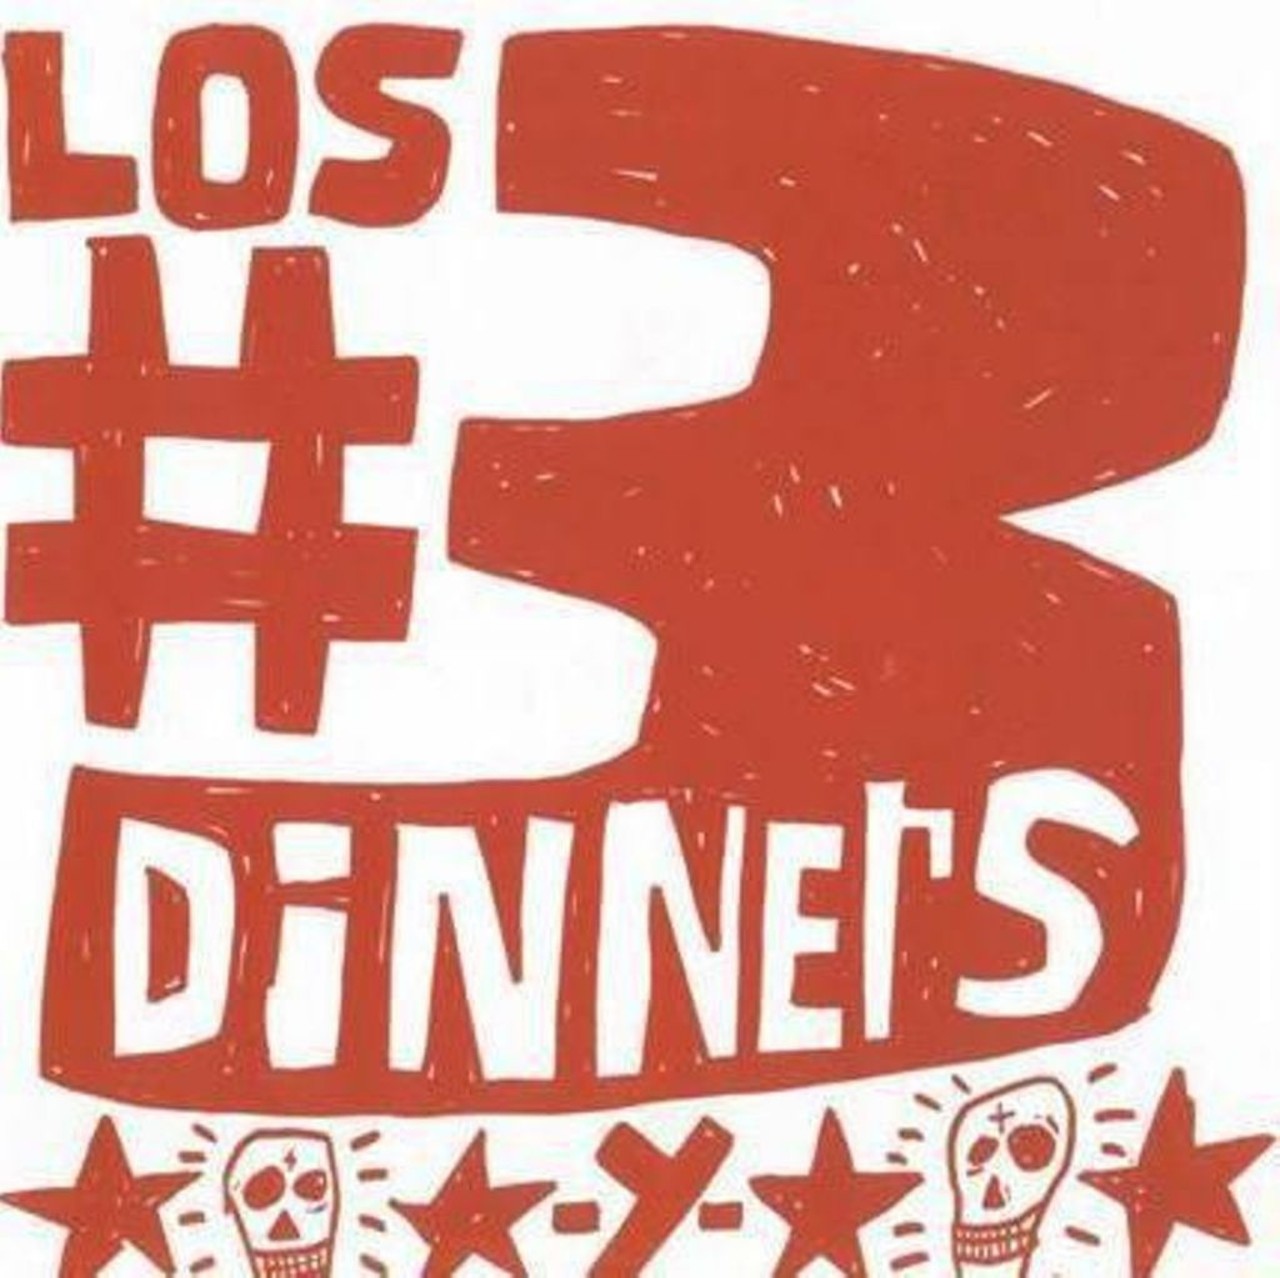  Los #3 Dinners 
Sat., Aug. 12, 9-11 p.m., The Cove, 606 W. Cypress St.